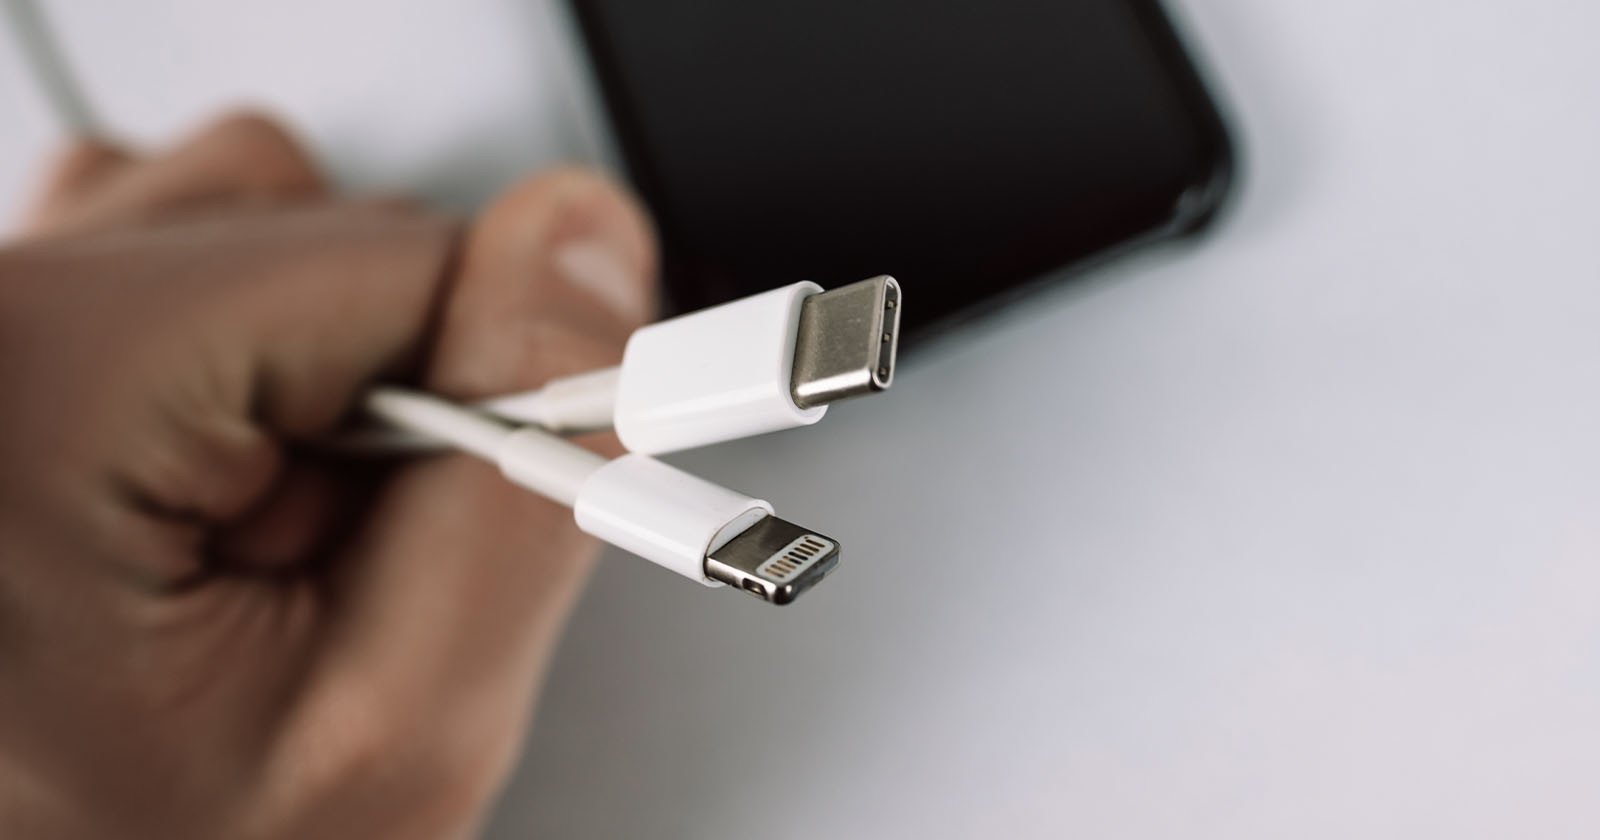 EU Votes to Make USB-C the Charging Standard by 2024